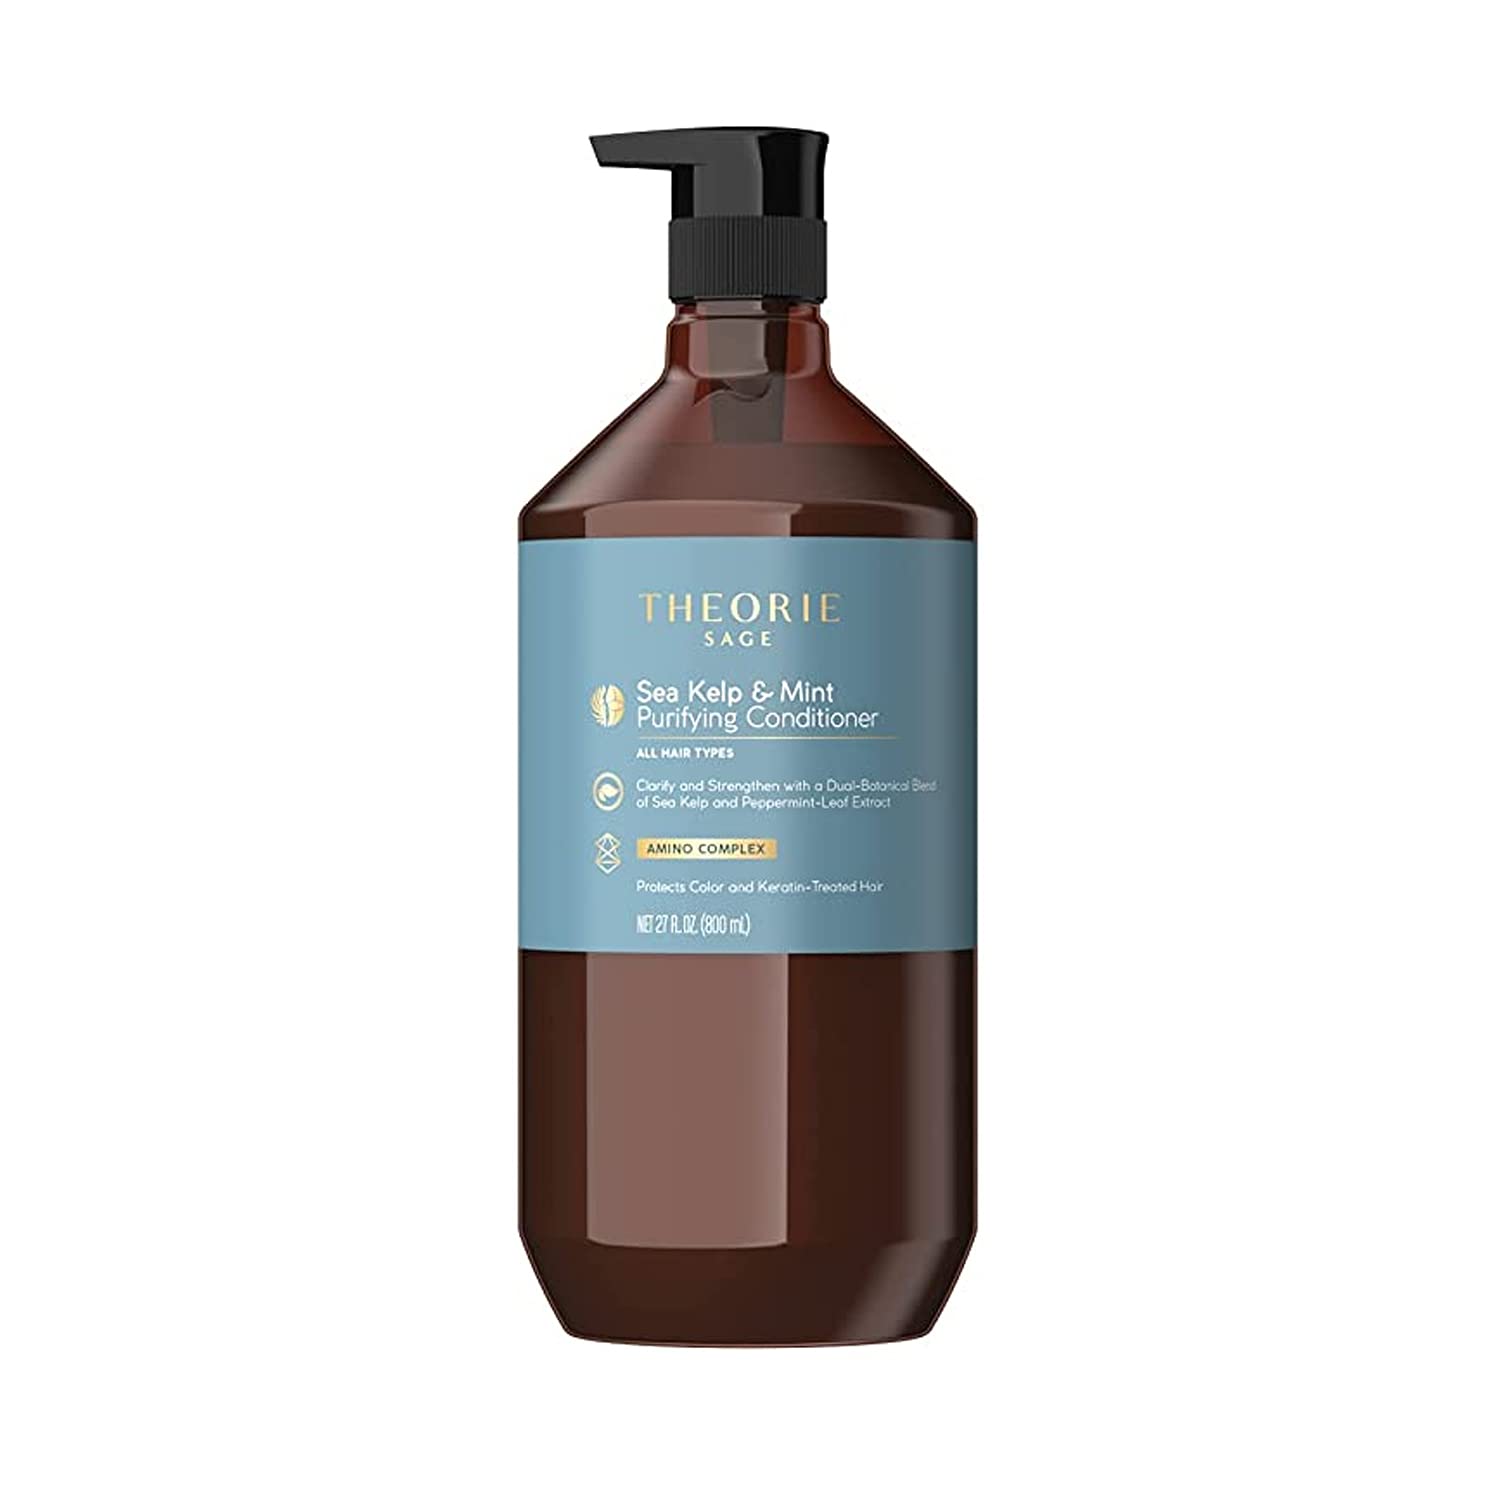 Theorie Sea Kelp and Mint Purifying Conditioner - Clarify & Strengthen - Suited for All Hair Types - Protects Color & Keratin Treated Hair, Pump Bottle 800